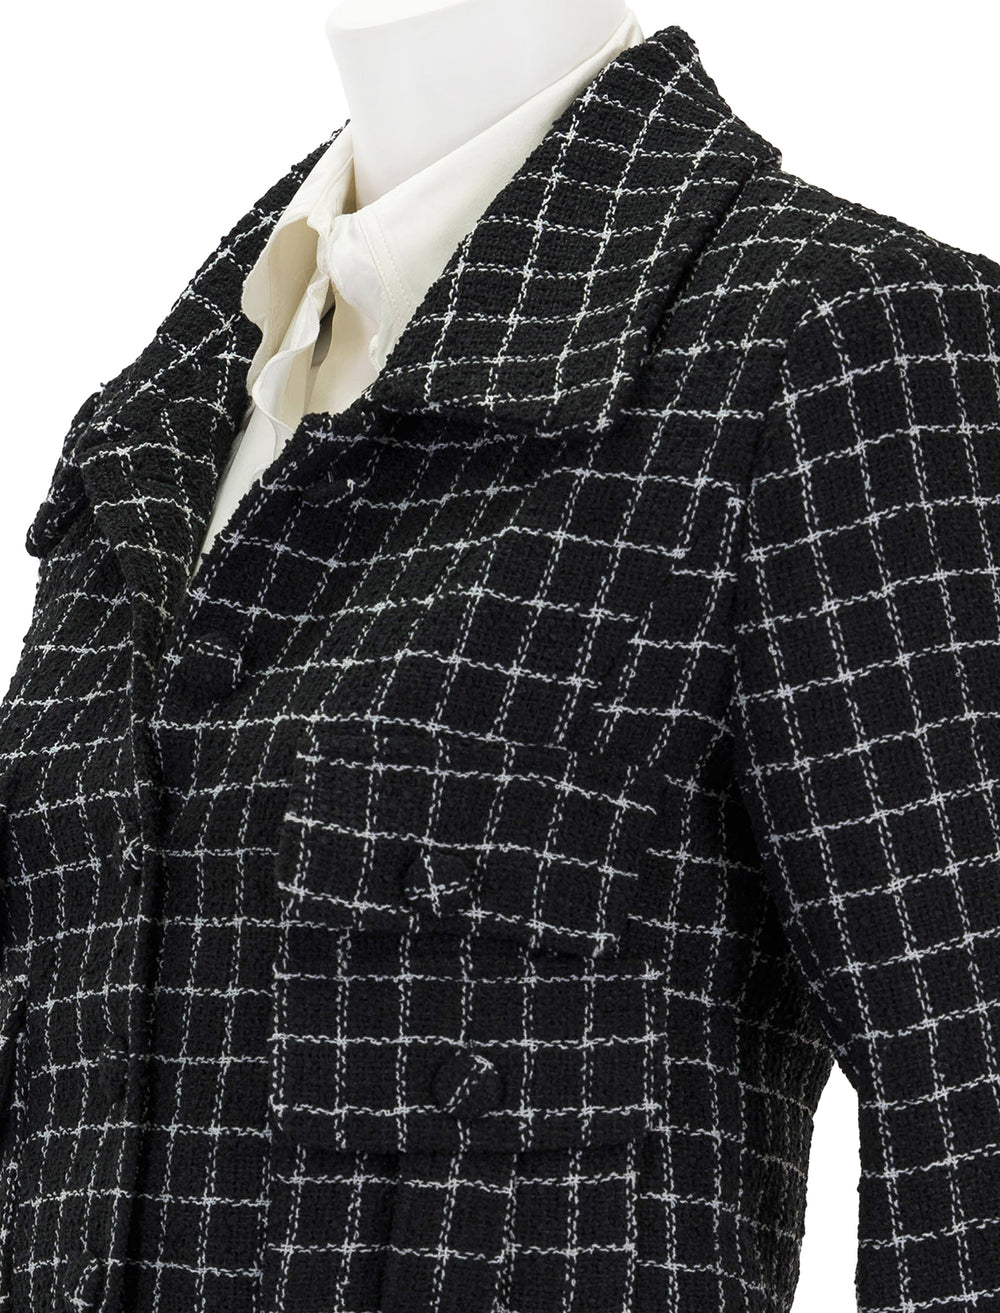 Close-up view of English Factory's tweed jacket in black and white.